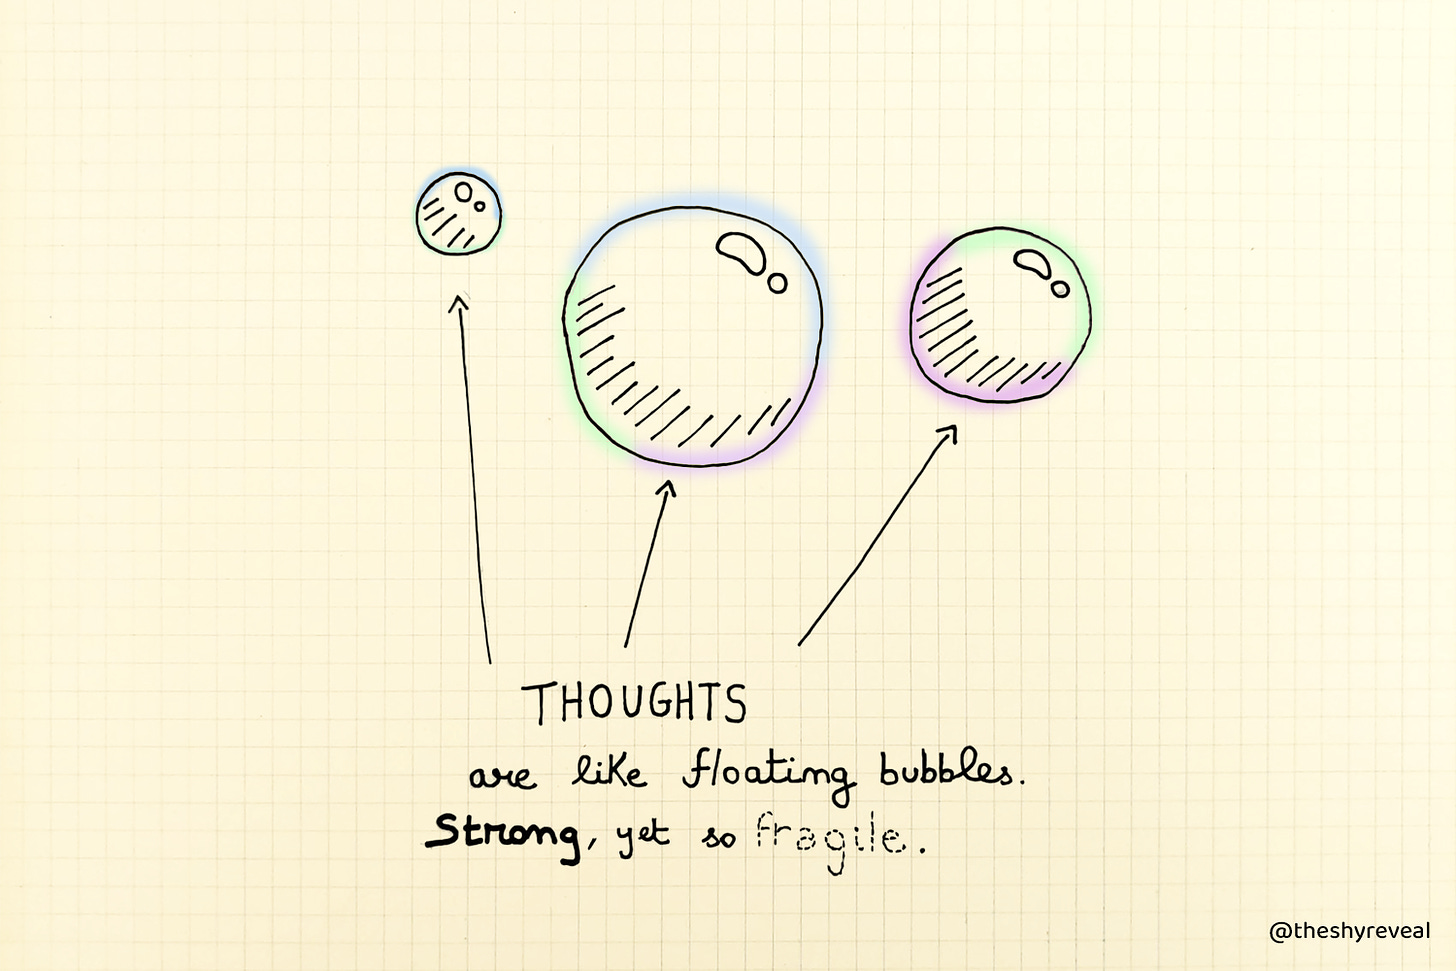 Drawing of 3 bubbles and a sentence beneath: "Thoughts are like floating bubbles. Strong, yet so fragile."